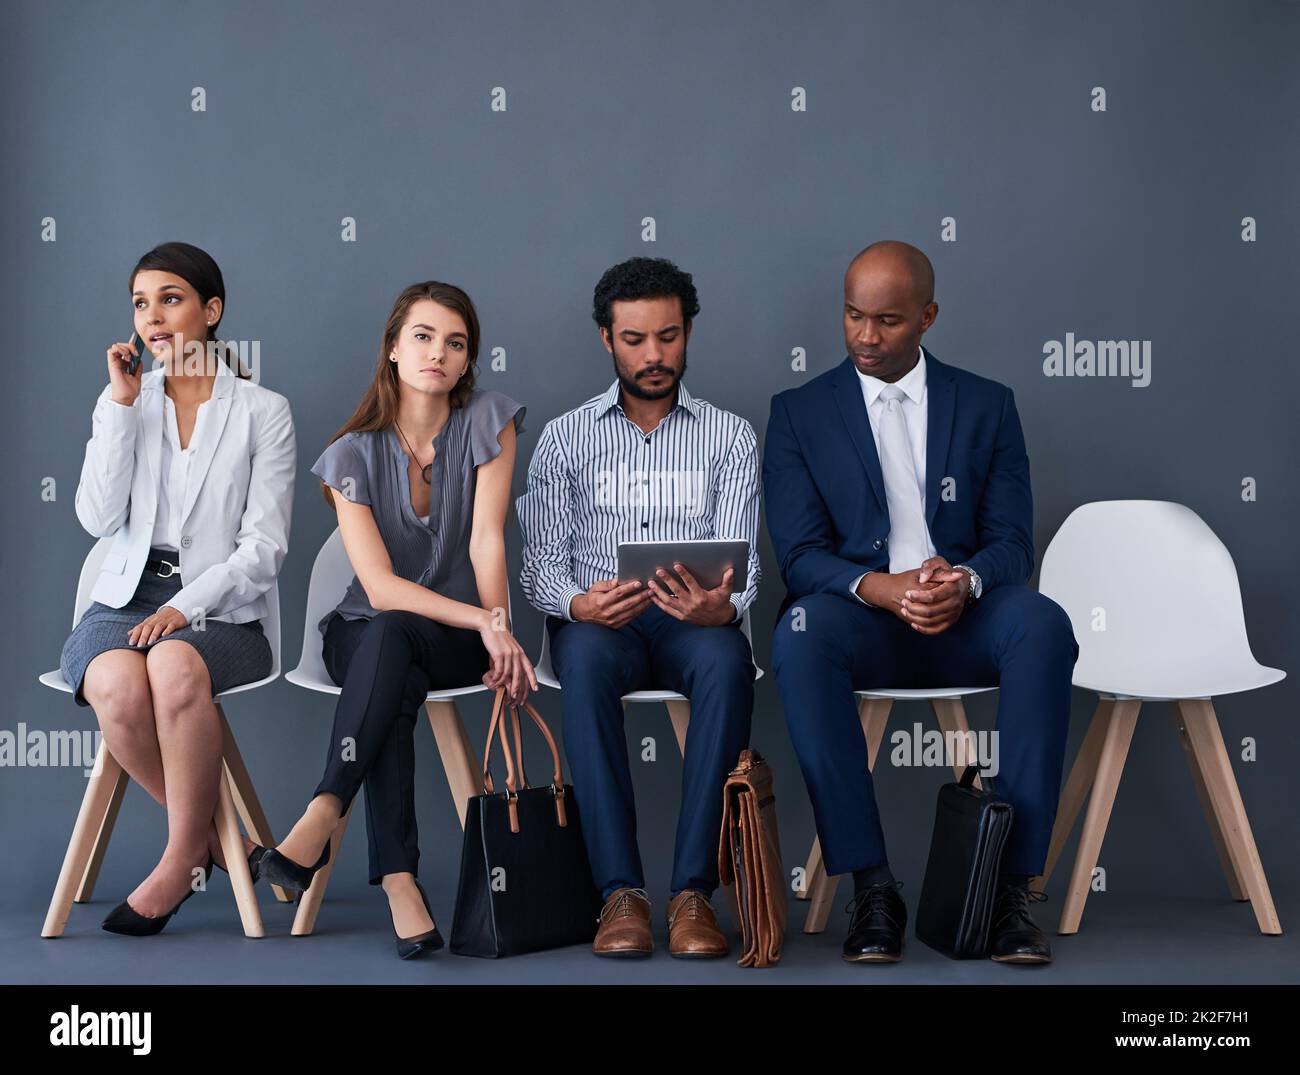 Trying to stay occupied while we wait. Studio shot of a group of corporate businesspeople waiting in line against a gray background. Stock Photo